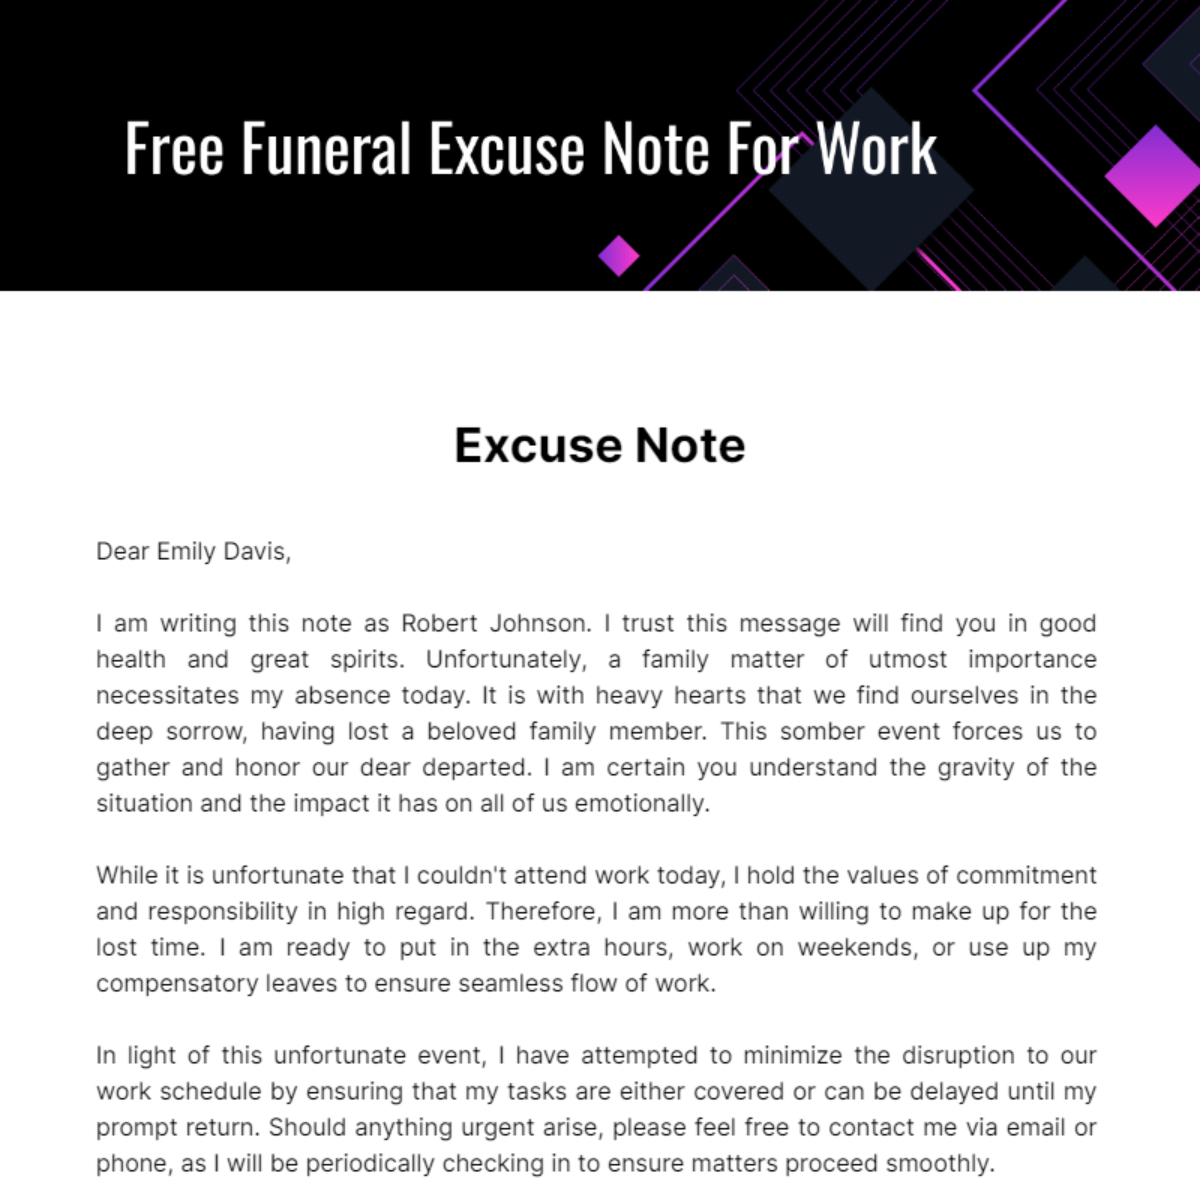 Funeral Excuse Note For Work Template